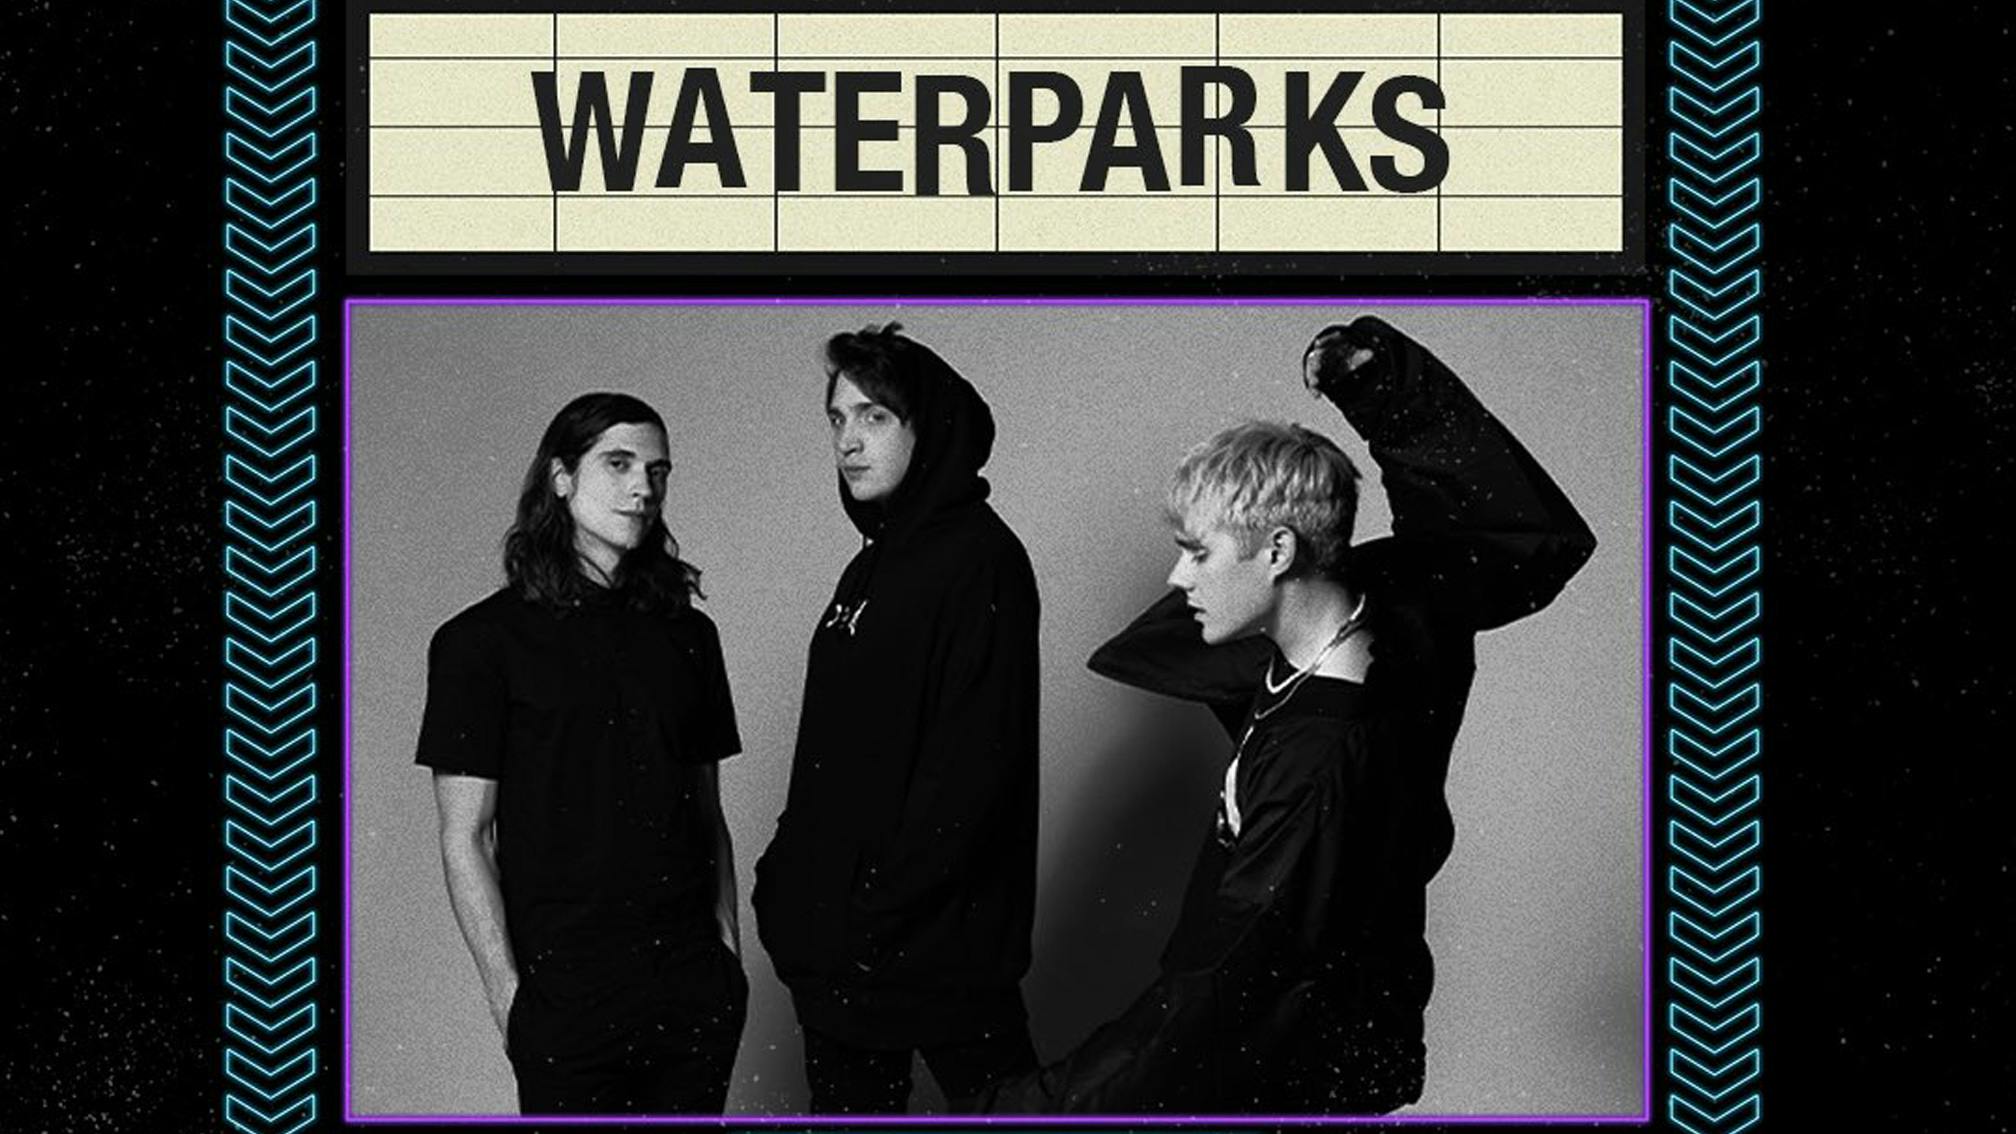 Waterparks announce Greatest Hits album release livestream